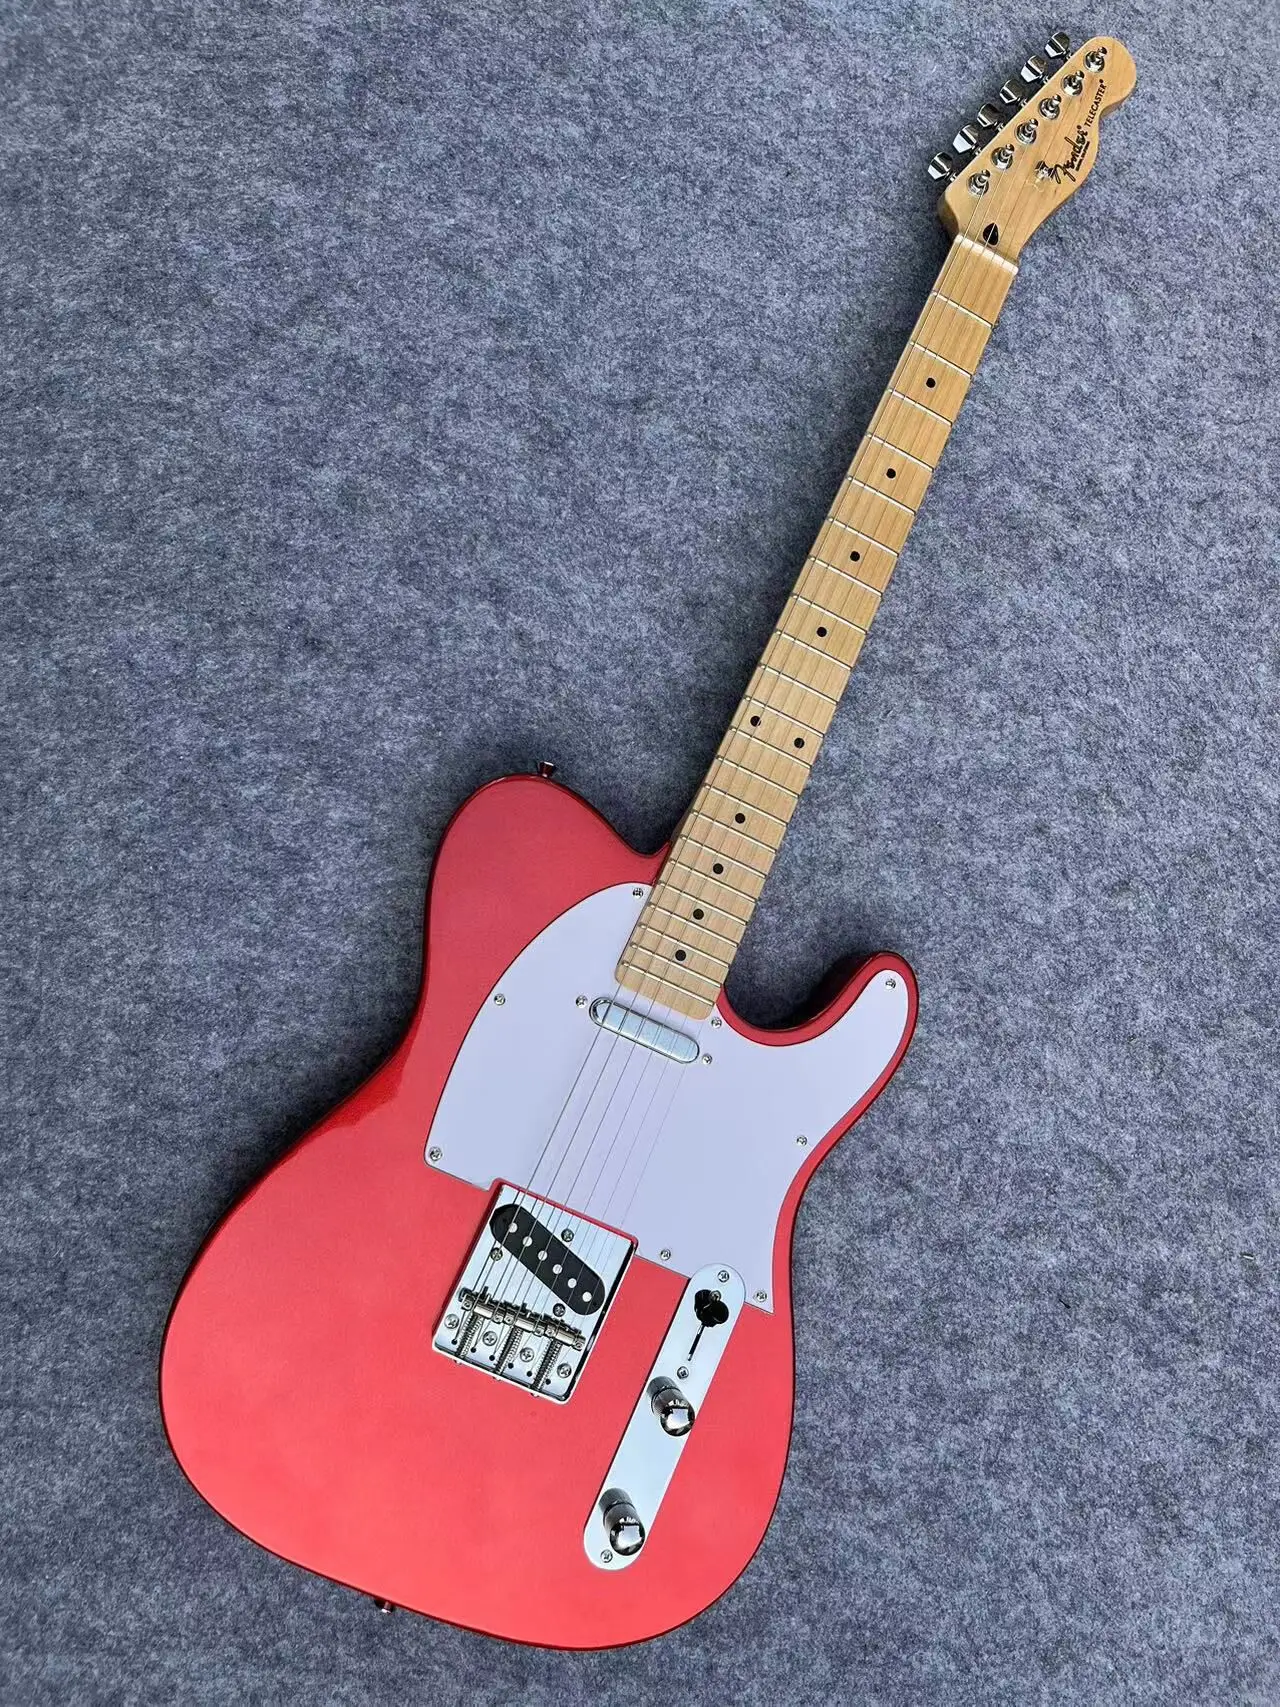 

Hot Tele electric guitar high quality basswood Body maple neck custom 6 string Guitars telecast-er style real photos DSGVFDSAGFG